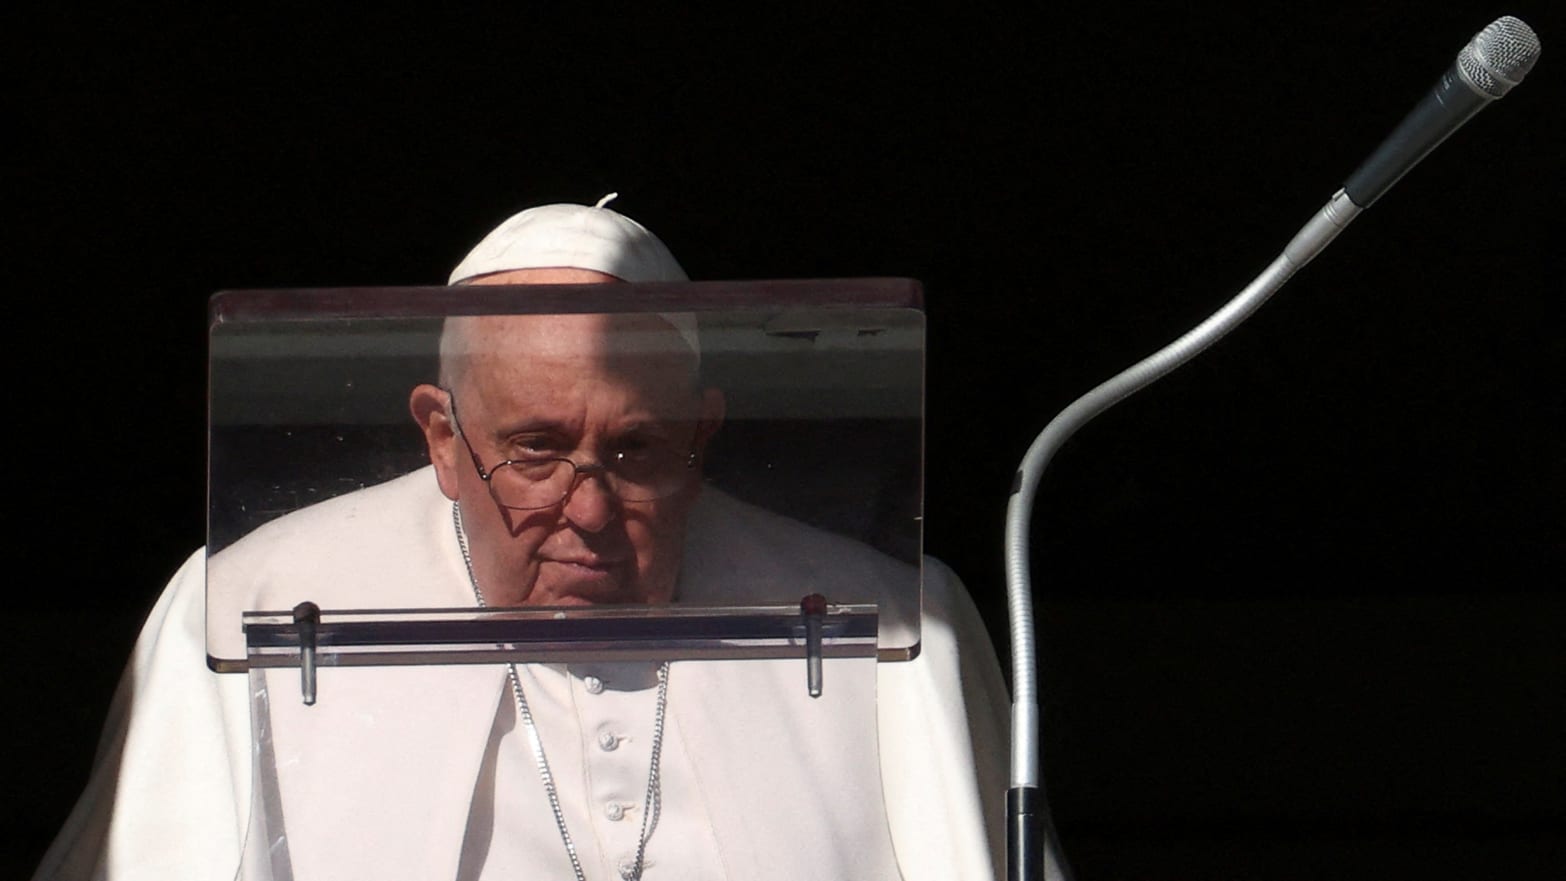 Pope Francis looks on to lead the Angelus prayer from his window